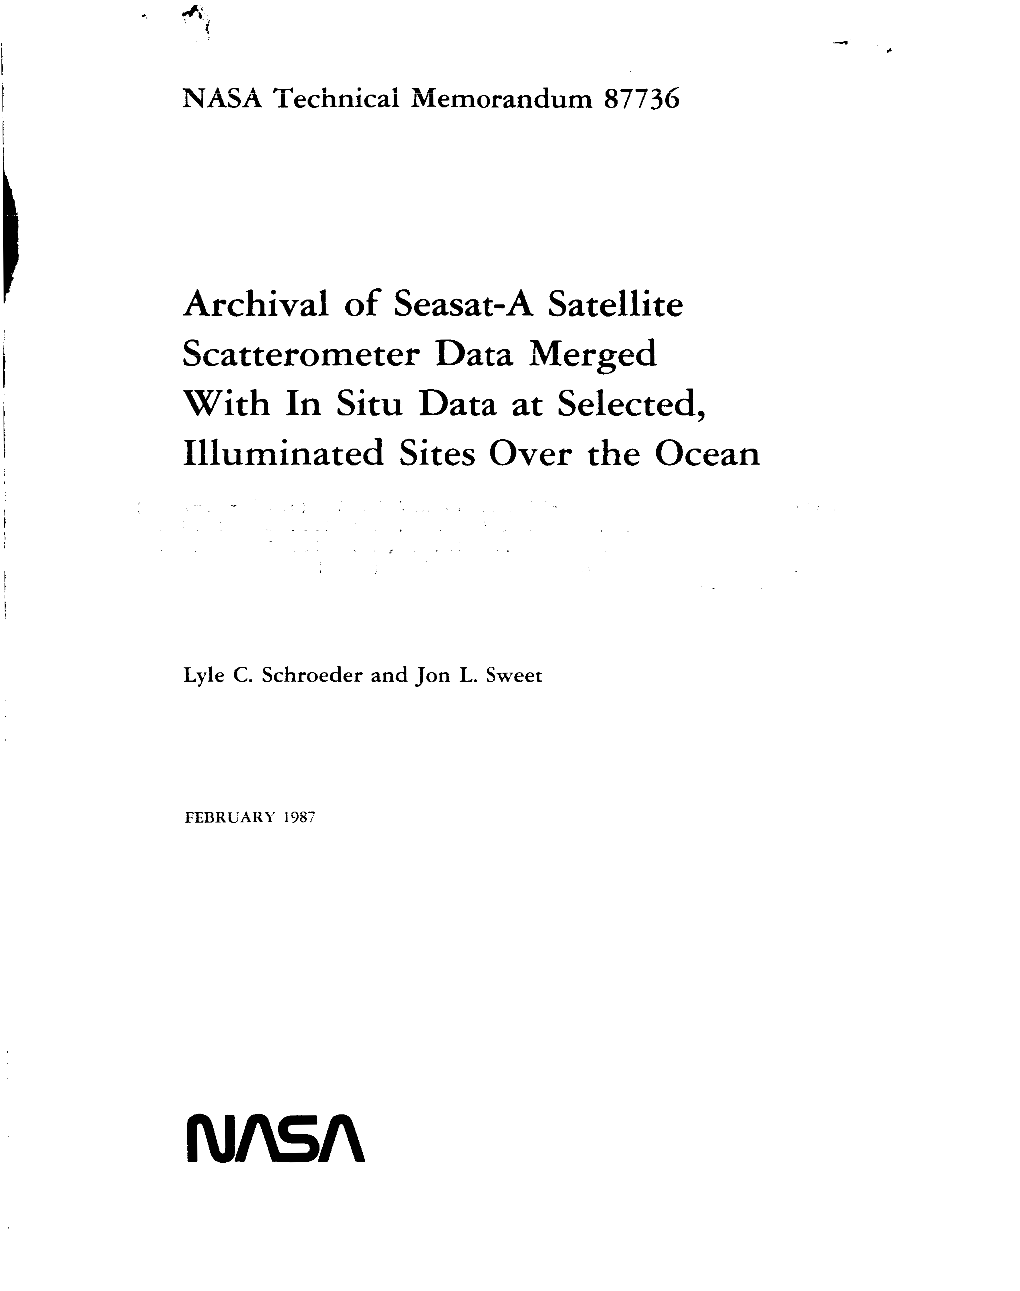 Archival of Seasat-A Satellite with in Situ Data at Selected